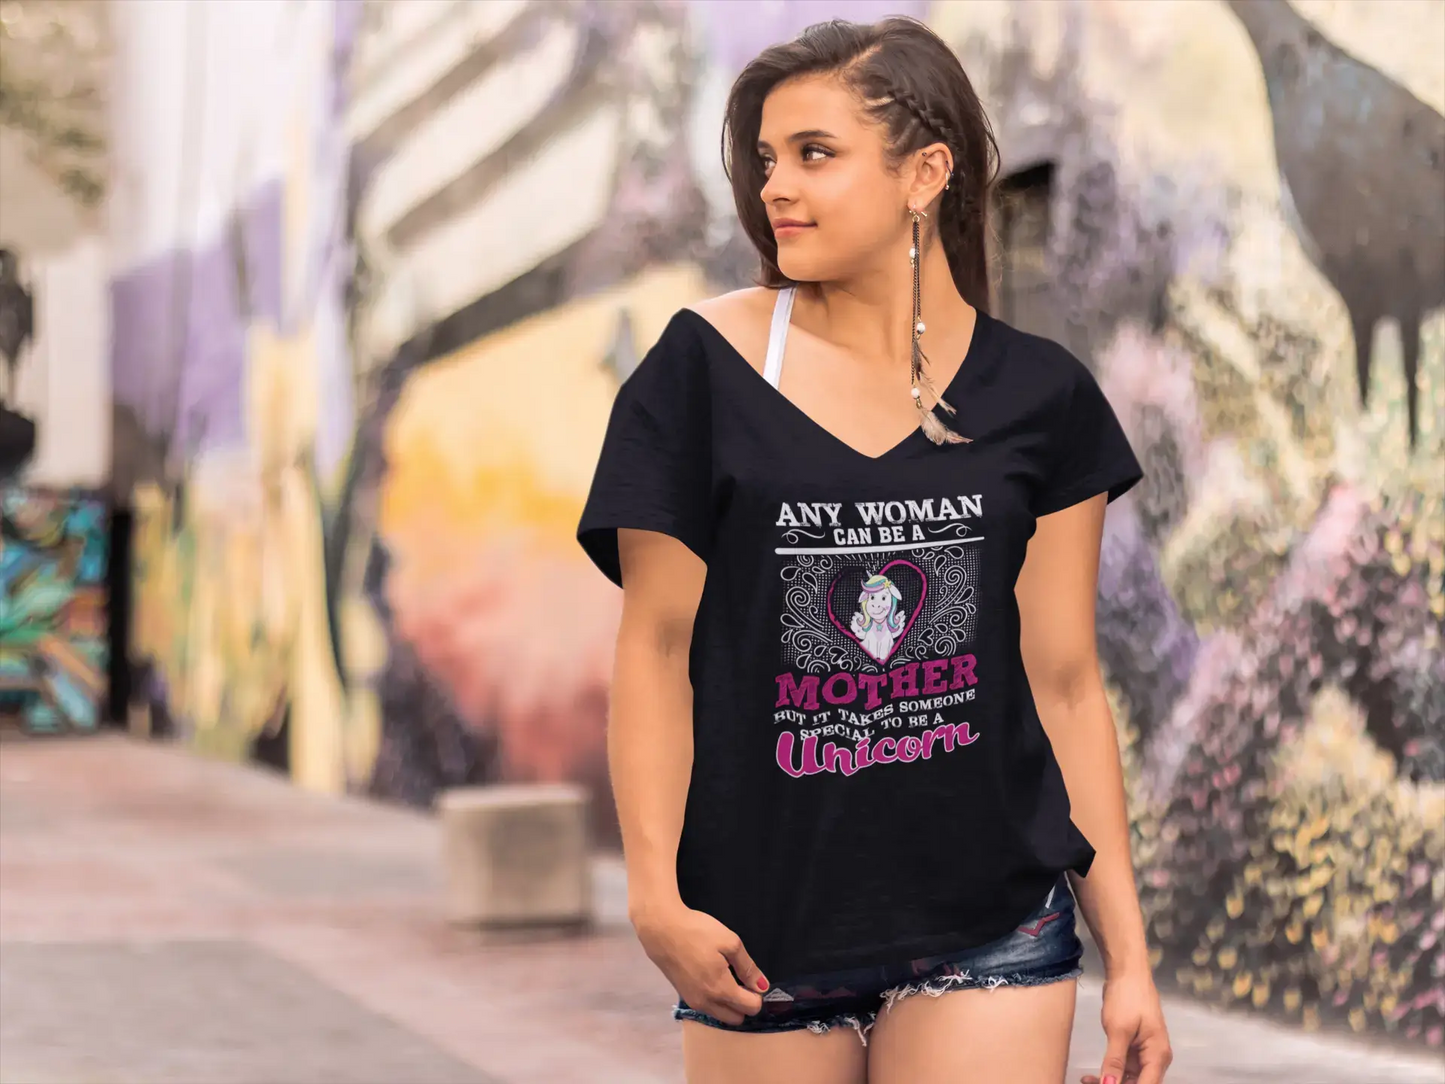 ULTRABASIC Women's T-Shirt Any Woman Can Be a Mother But It Takes Someone Special to Be a Unicorn